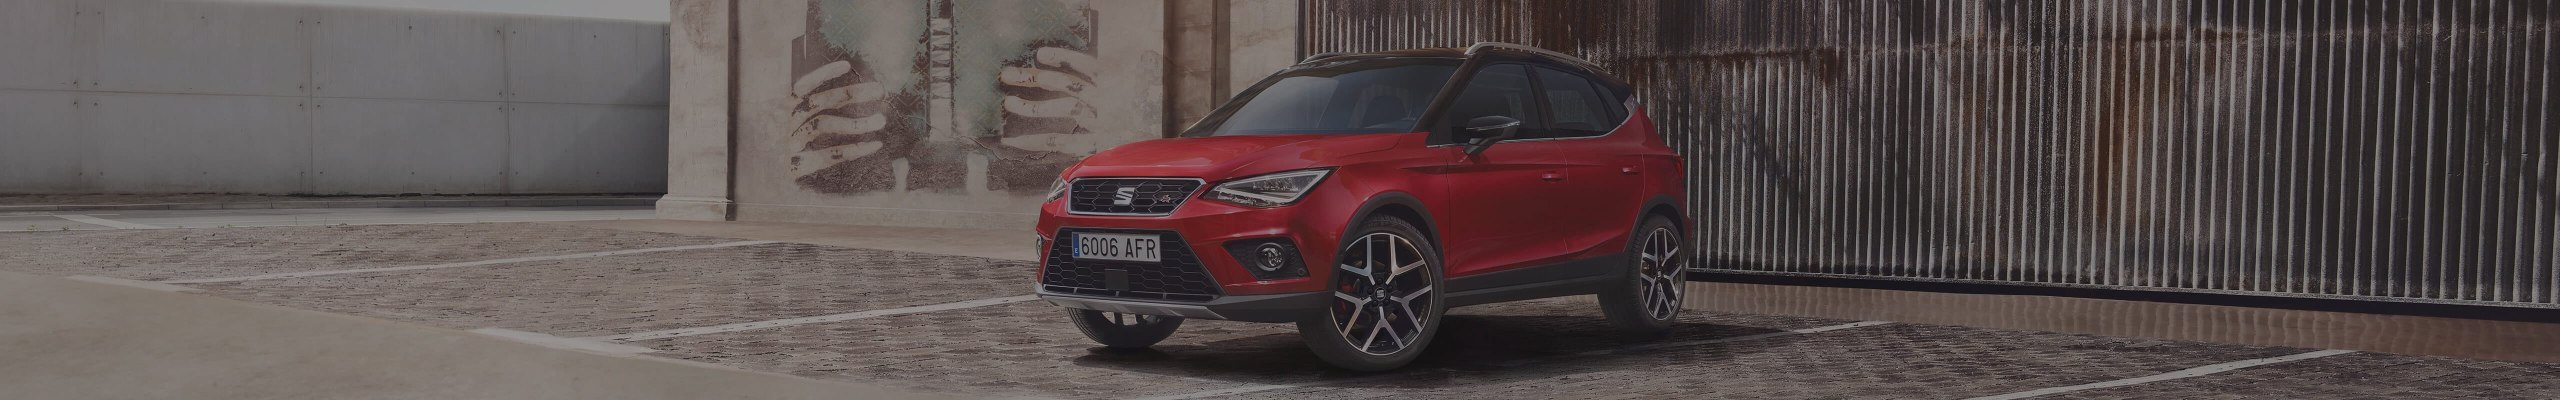 SEAT Arona parked in the middle of a park - Arona boosts commercial performance